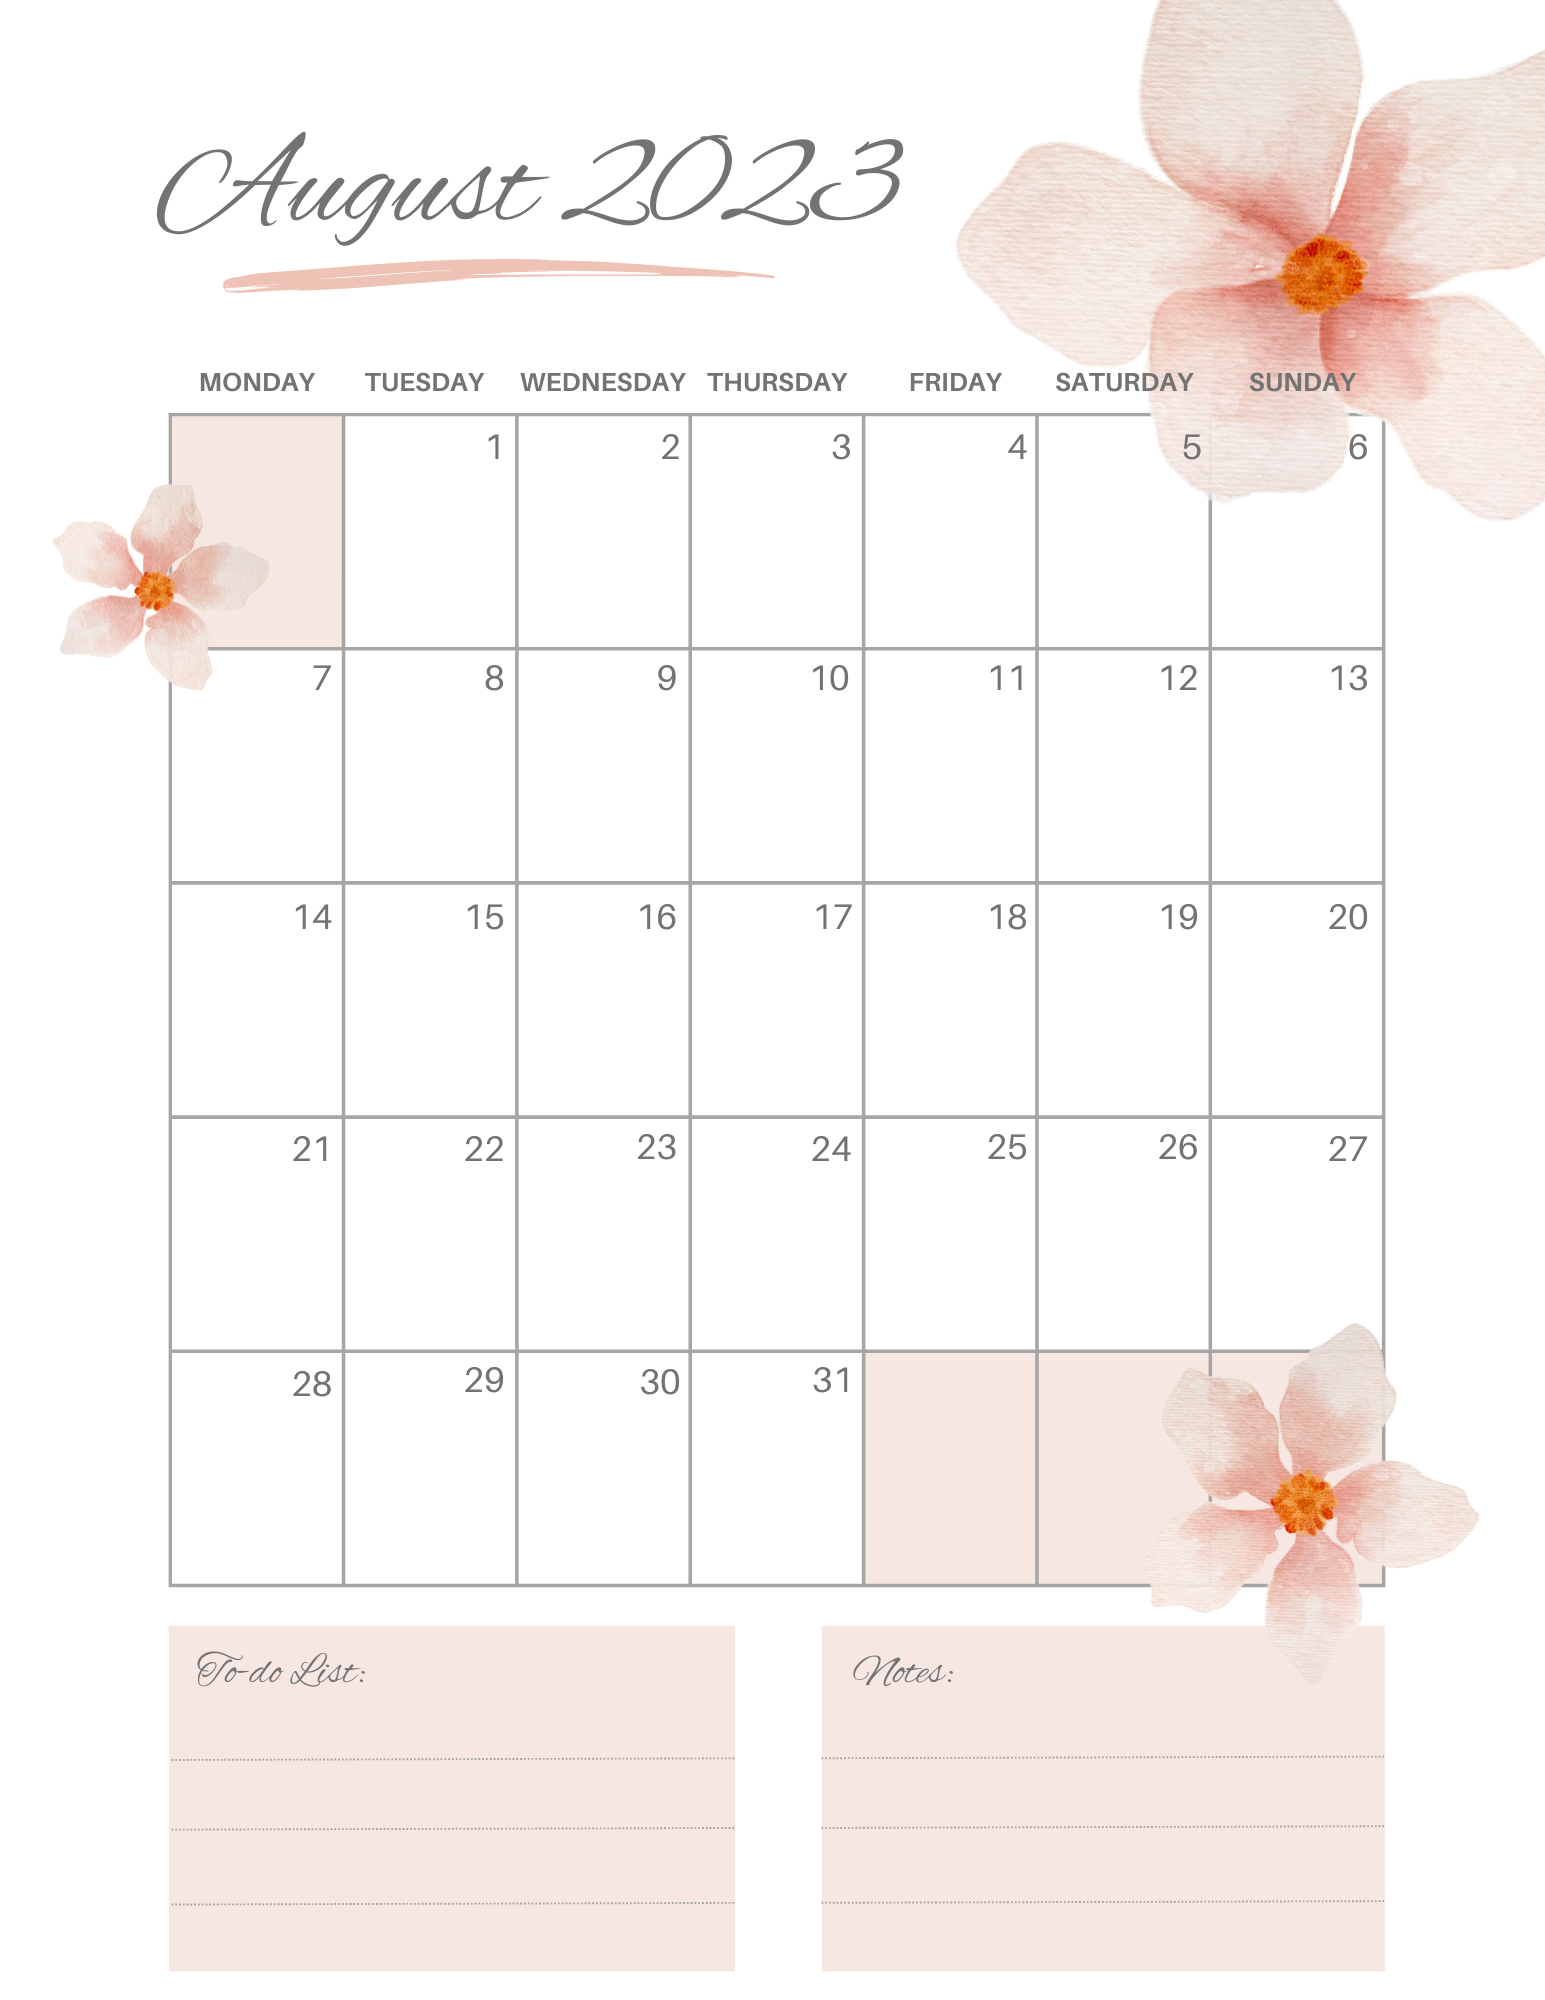 A August 2023 calendar printable, perfect for planning the last days of summer